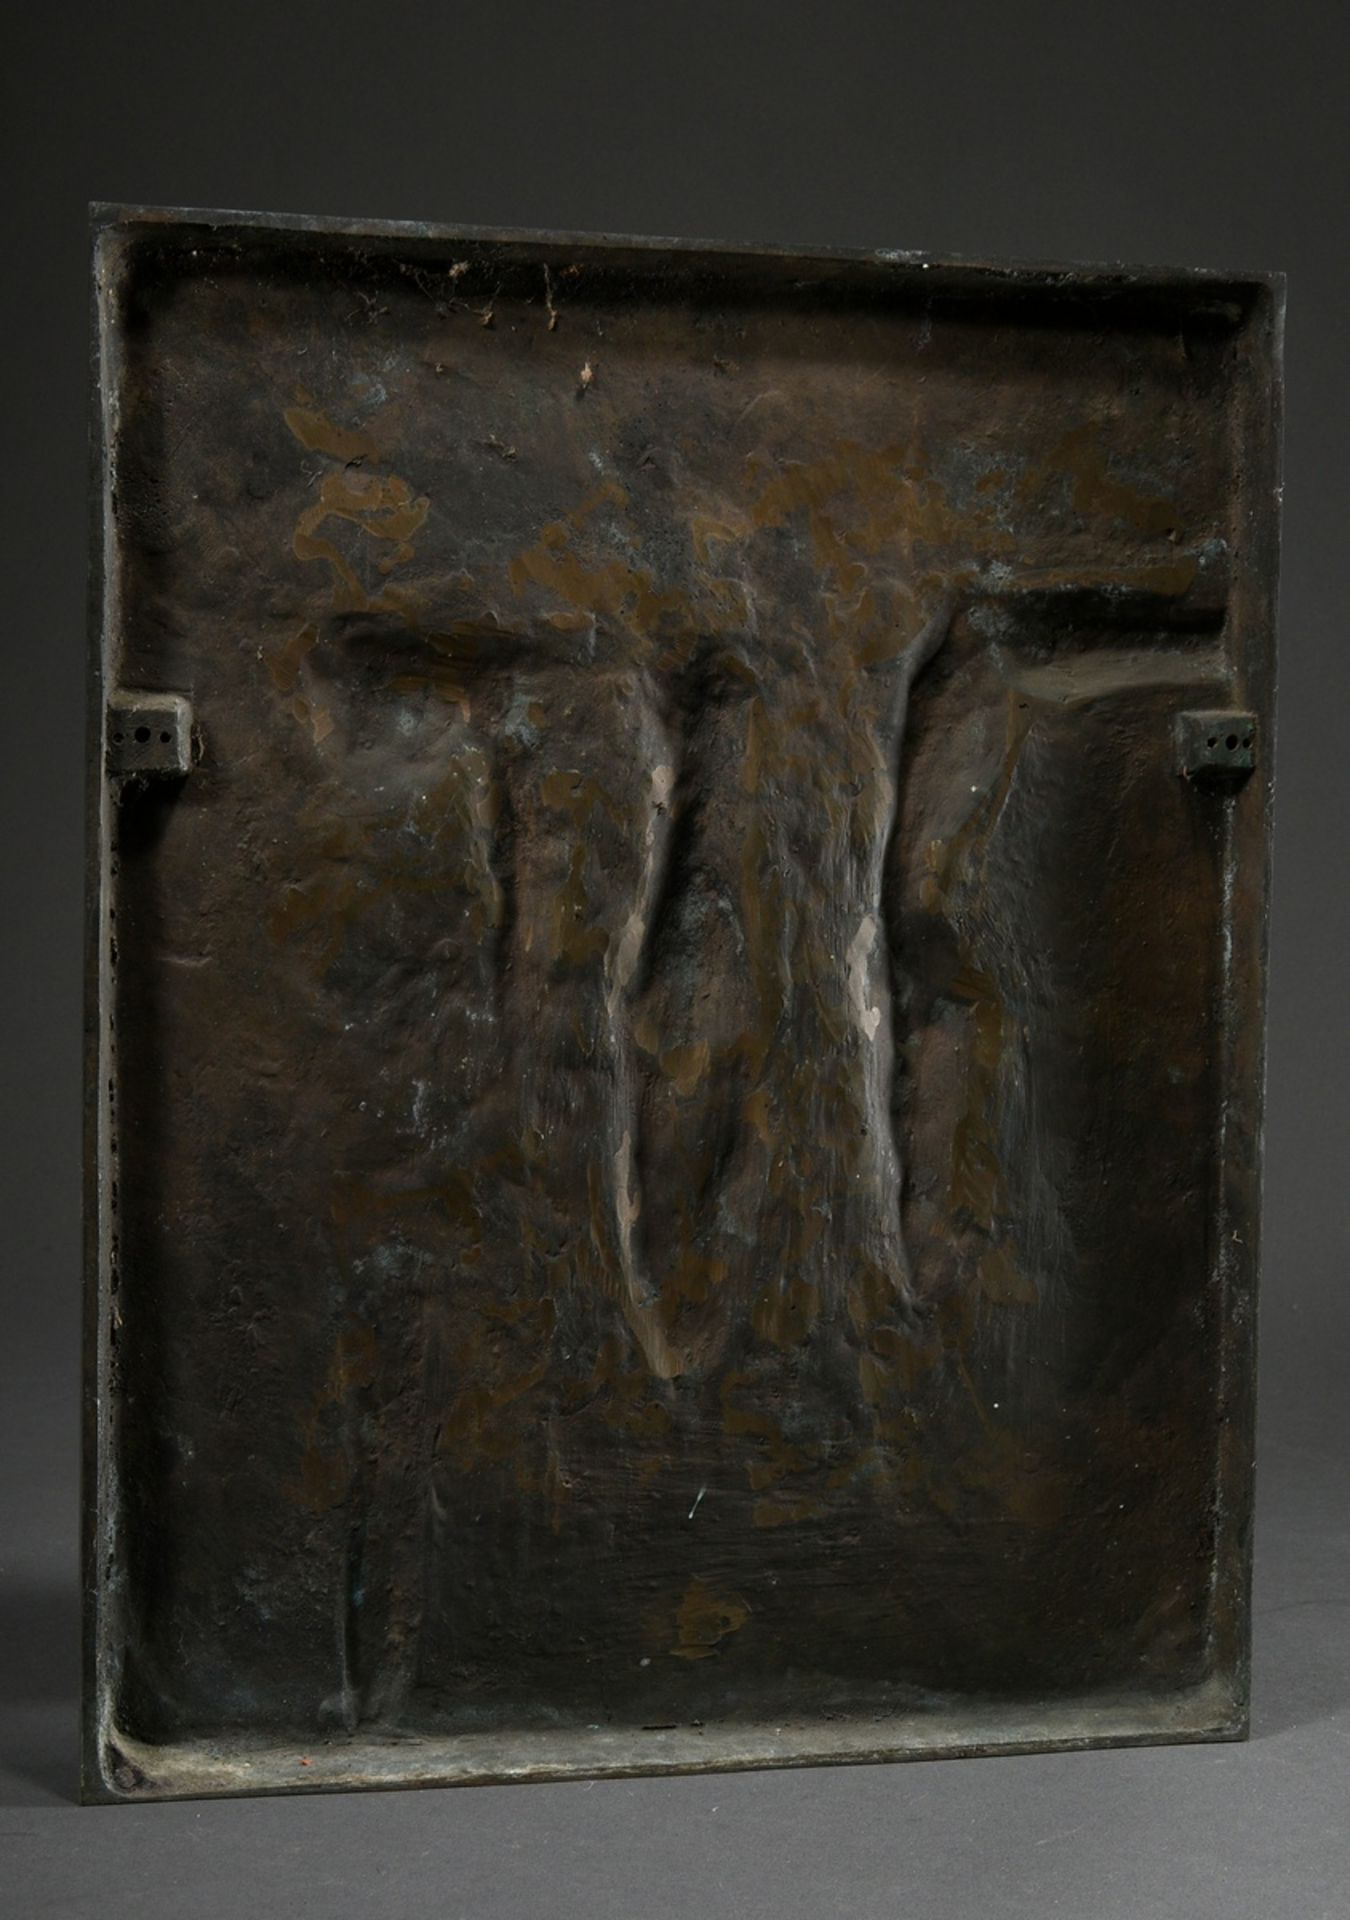 Wunderlich, Paul (1927-2010) "Nike Relief" 1977, bronze, 252/275, signed, numbered on side, 51,5x41 - Image 4 of 4